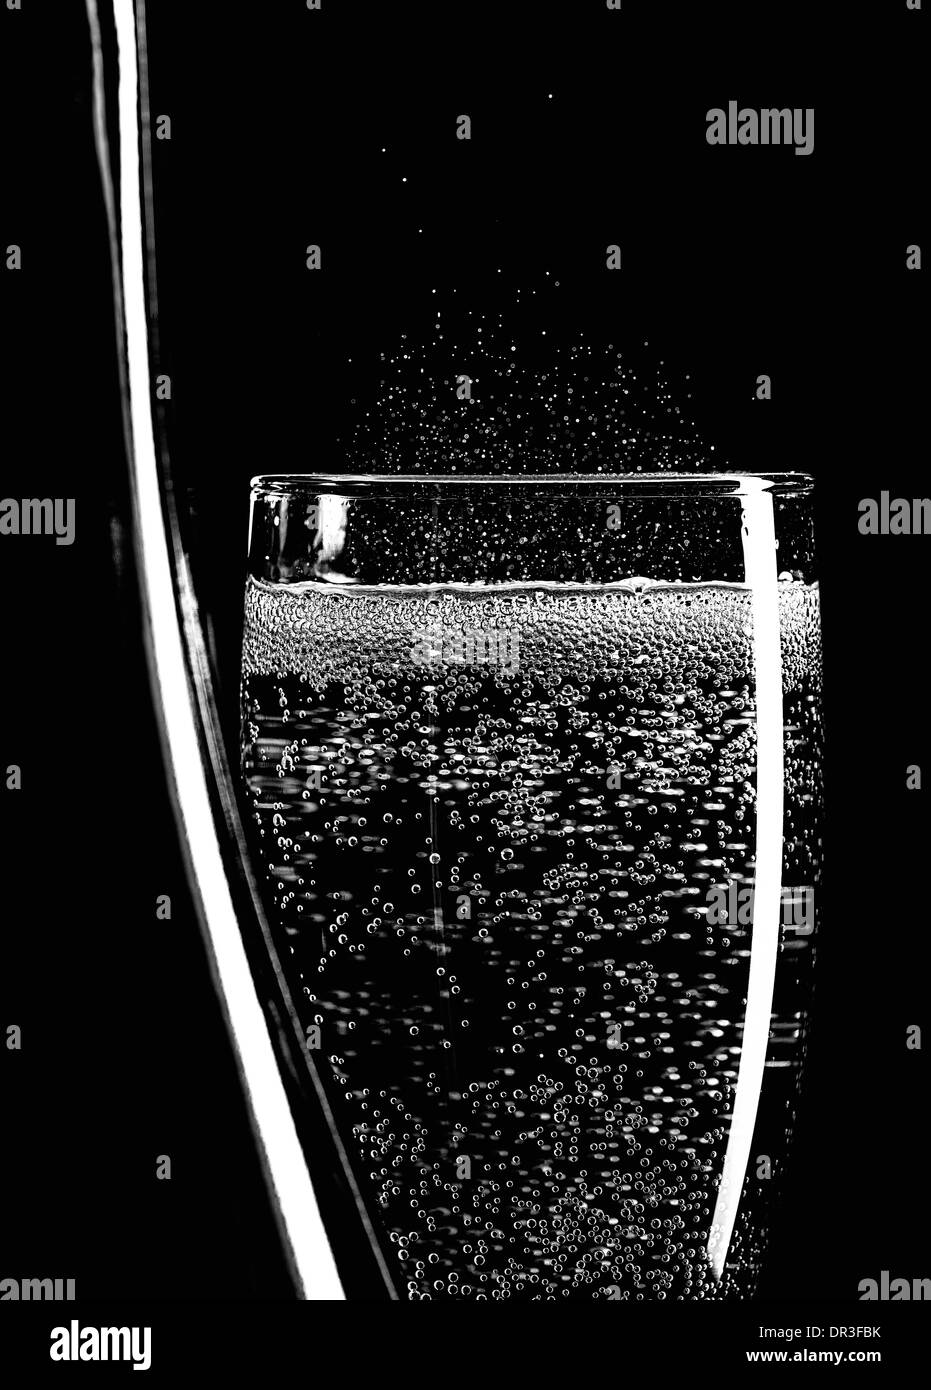 A champagne bottle and glass of sparkling wine, black and white image Stock Photo